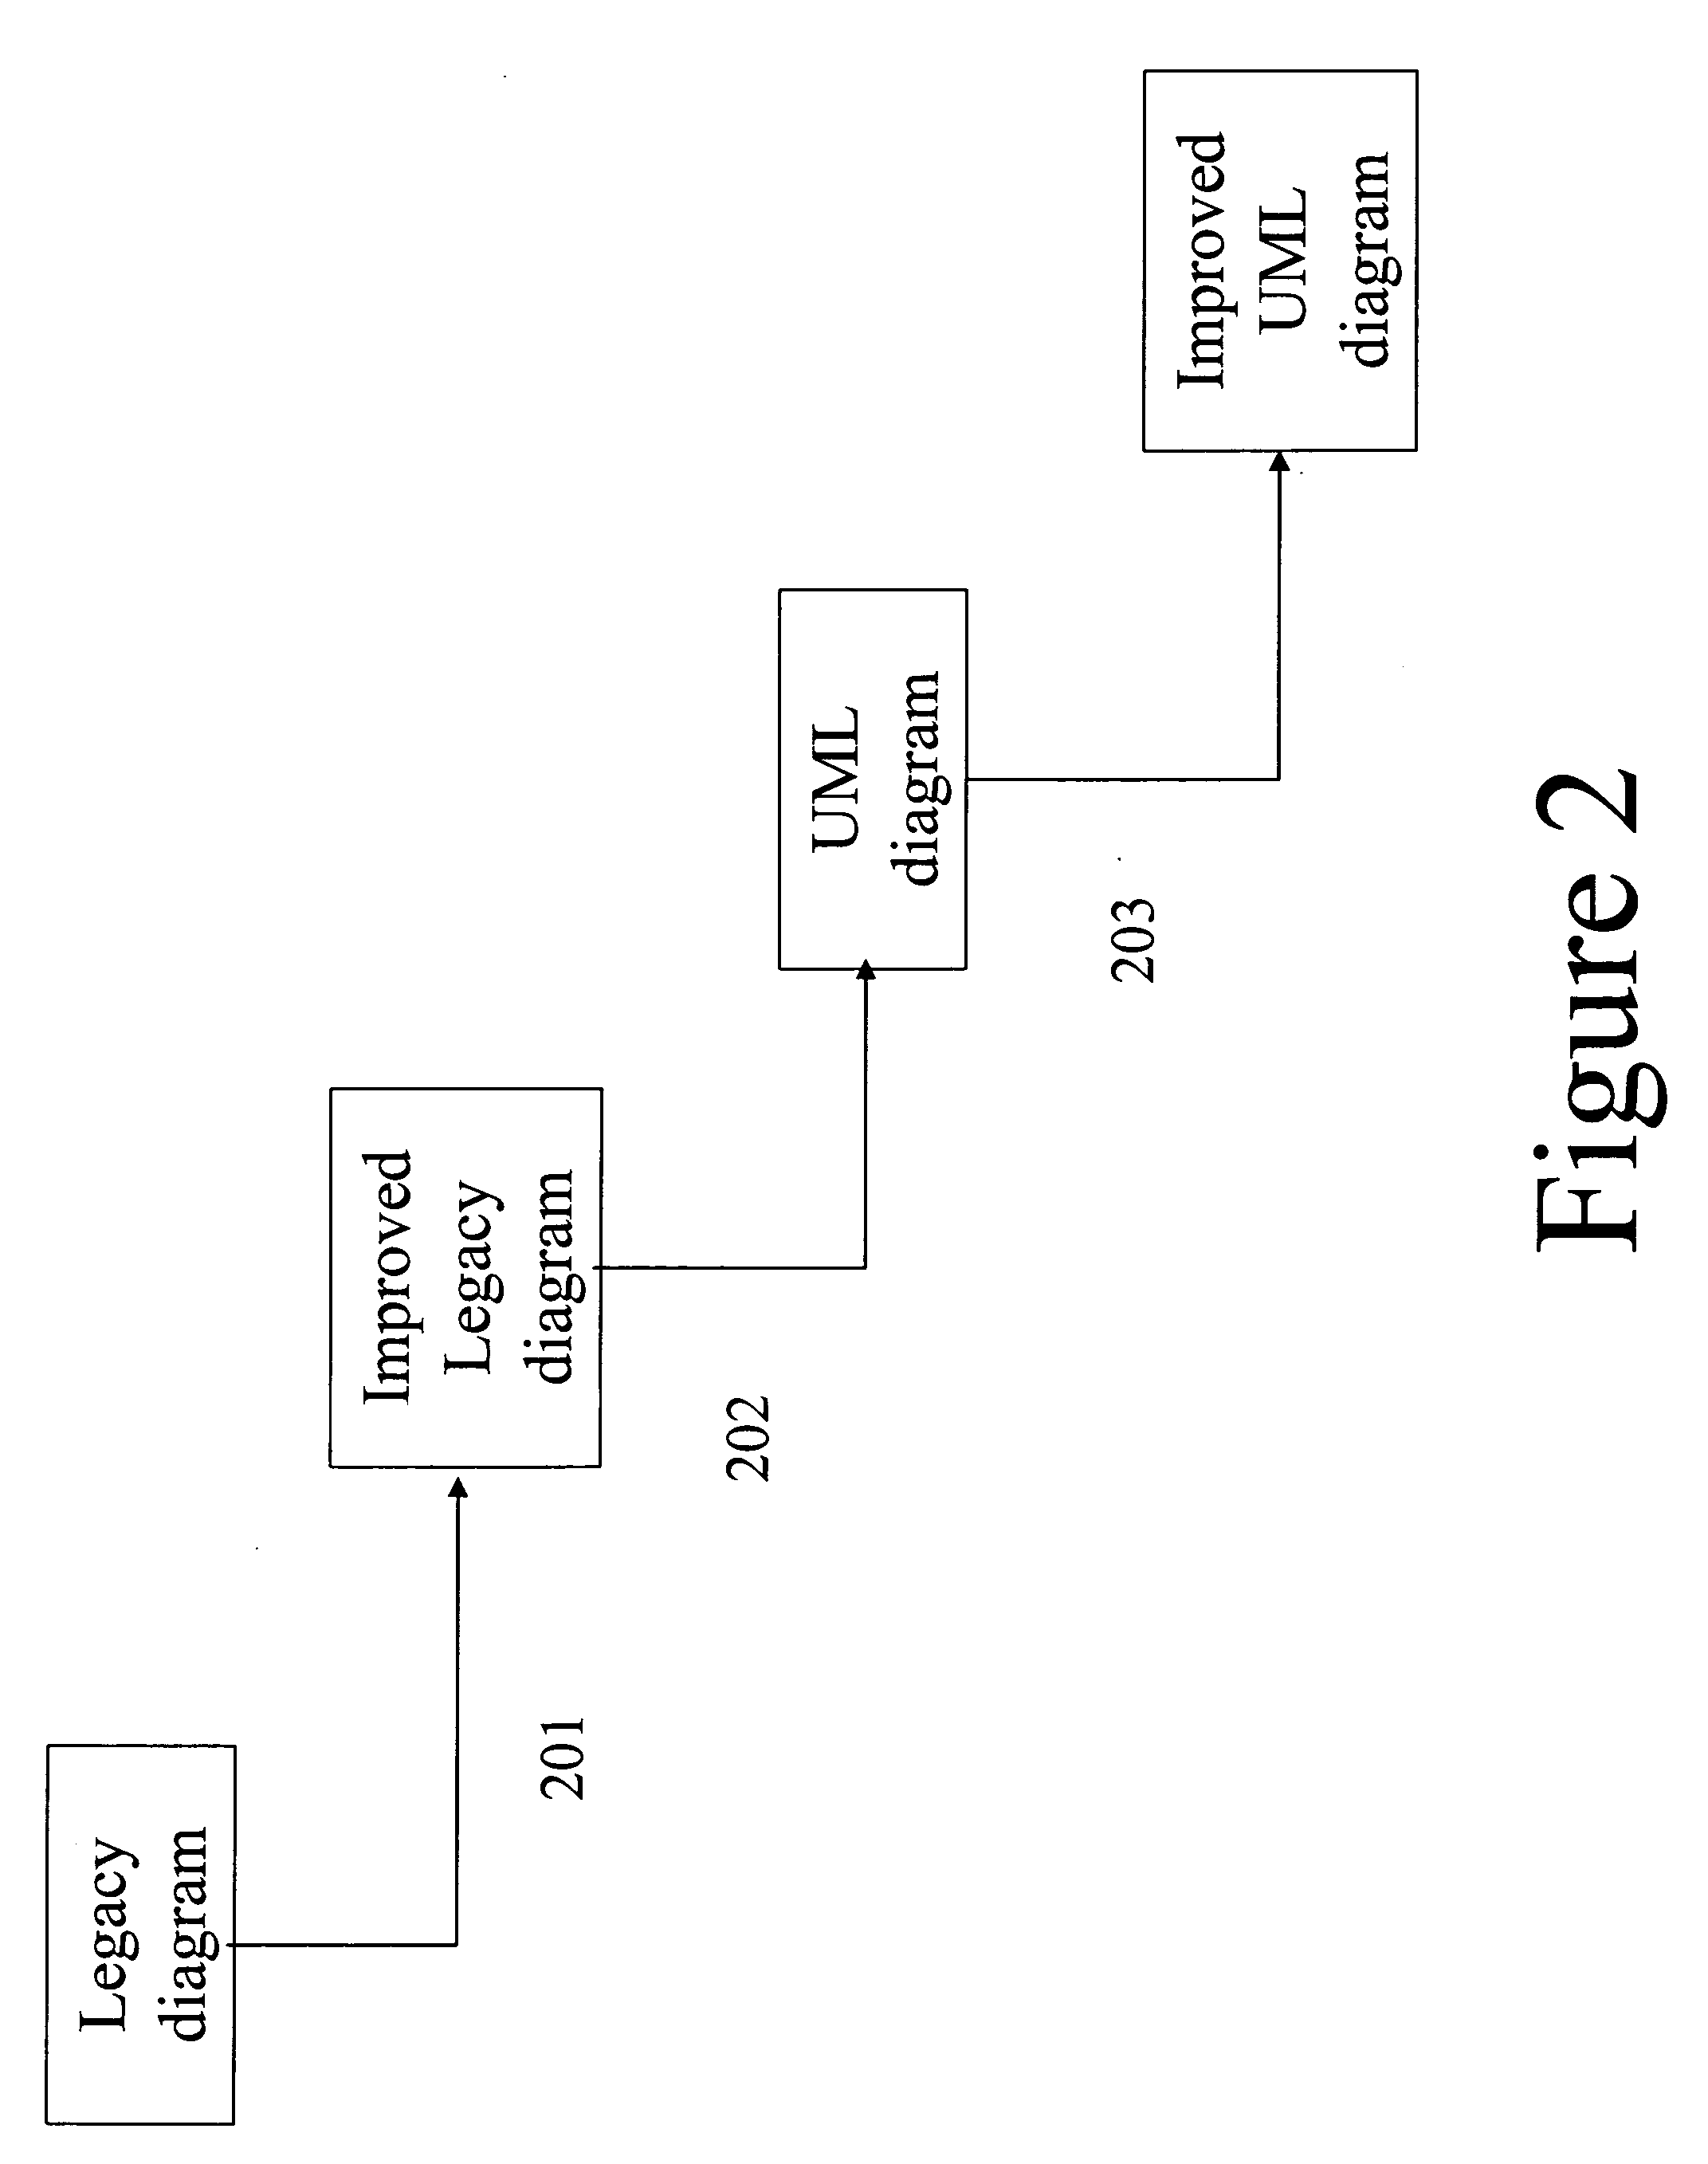 System and method for extracting UML models from legacy applications